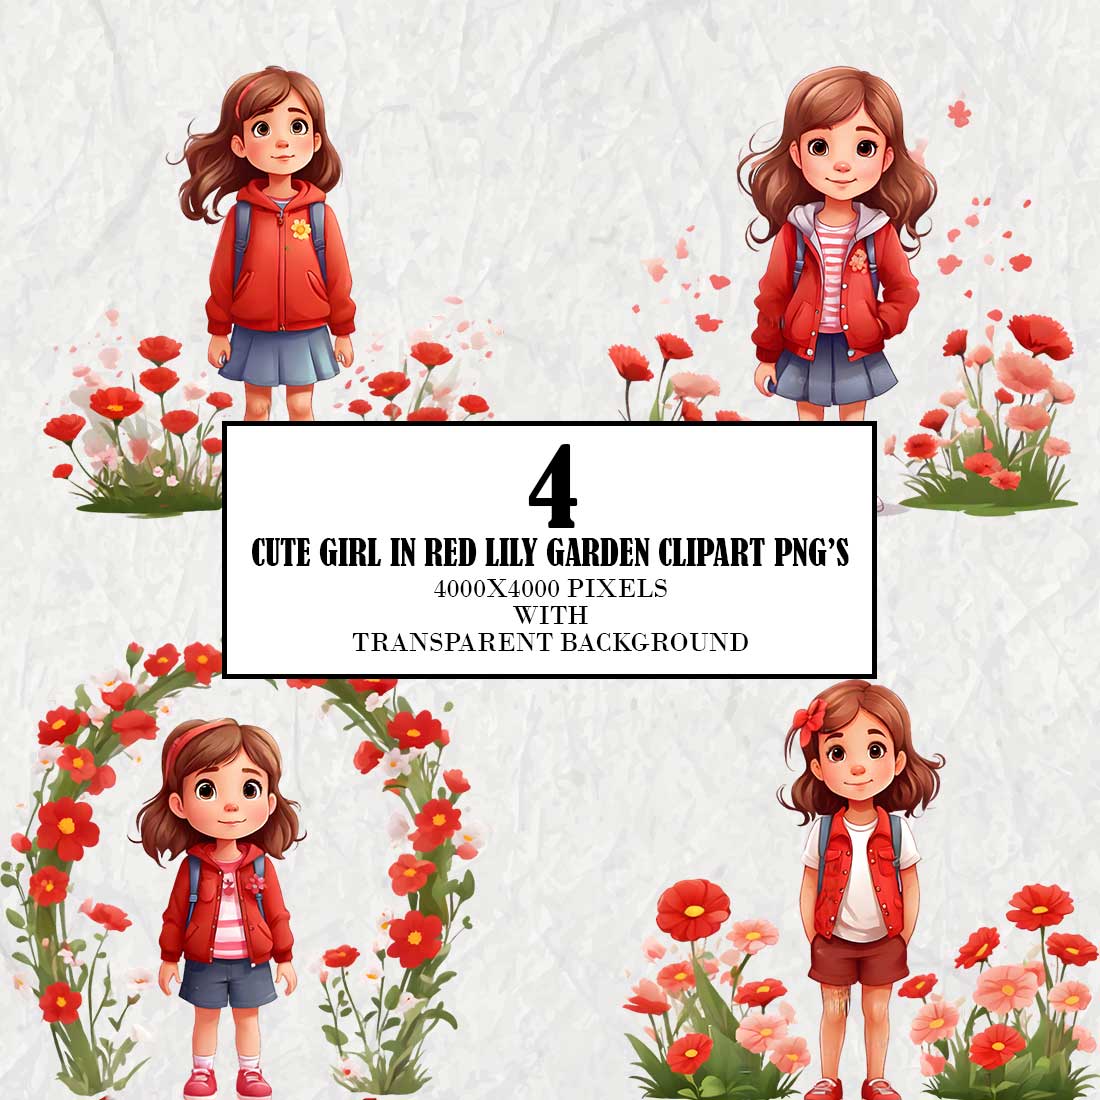 Cute Girl in Lily Garden preview image.